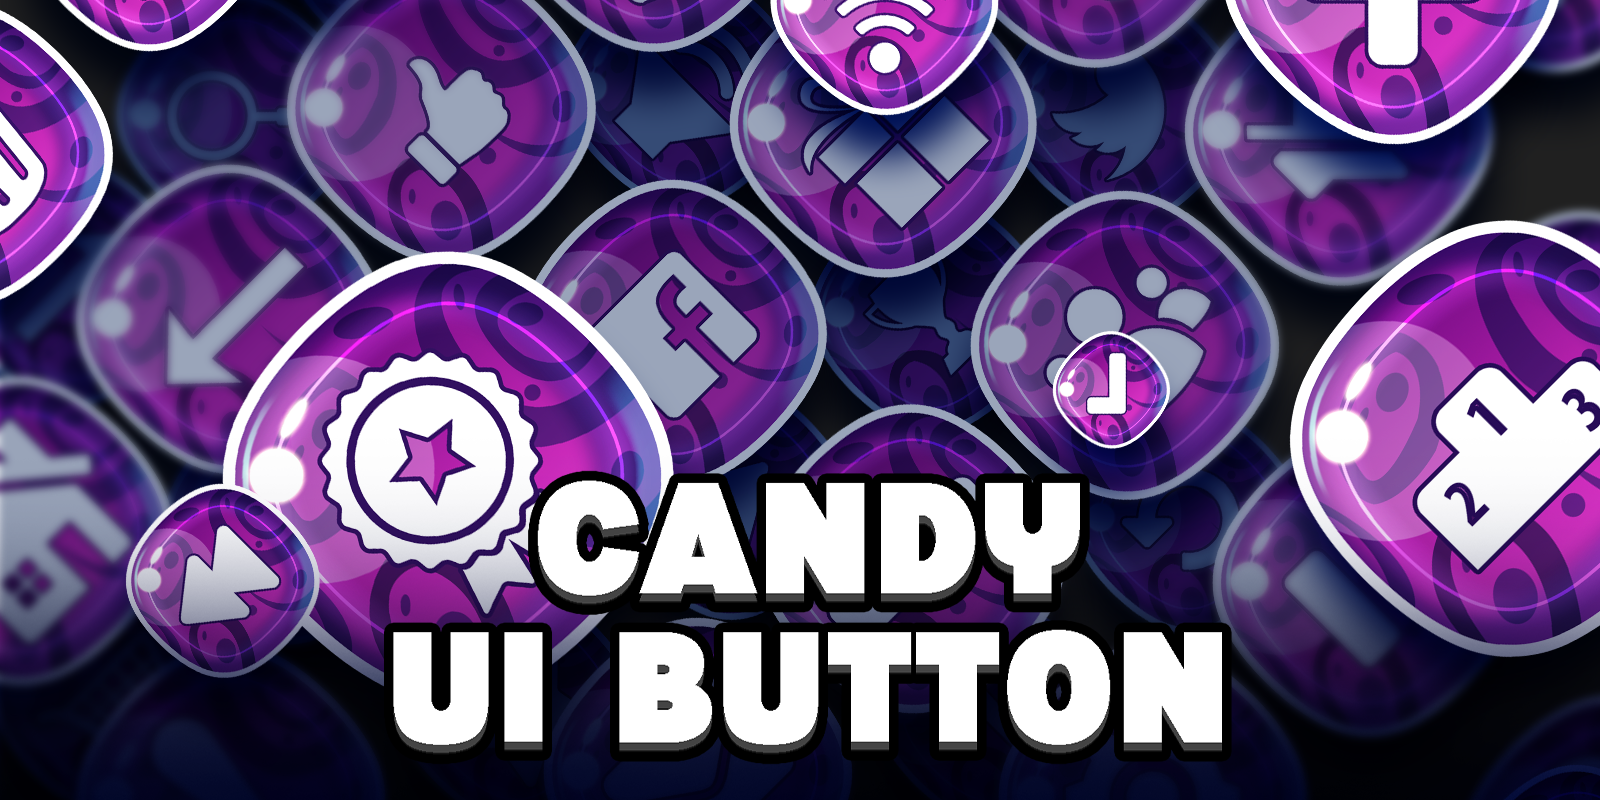 Candy UI Button #4